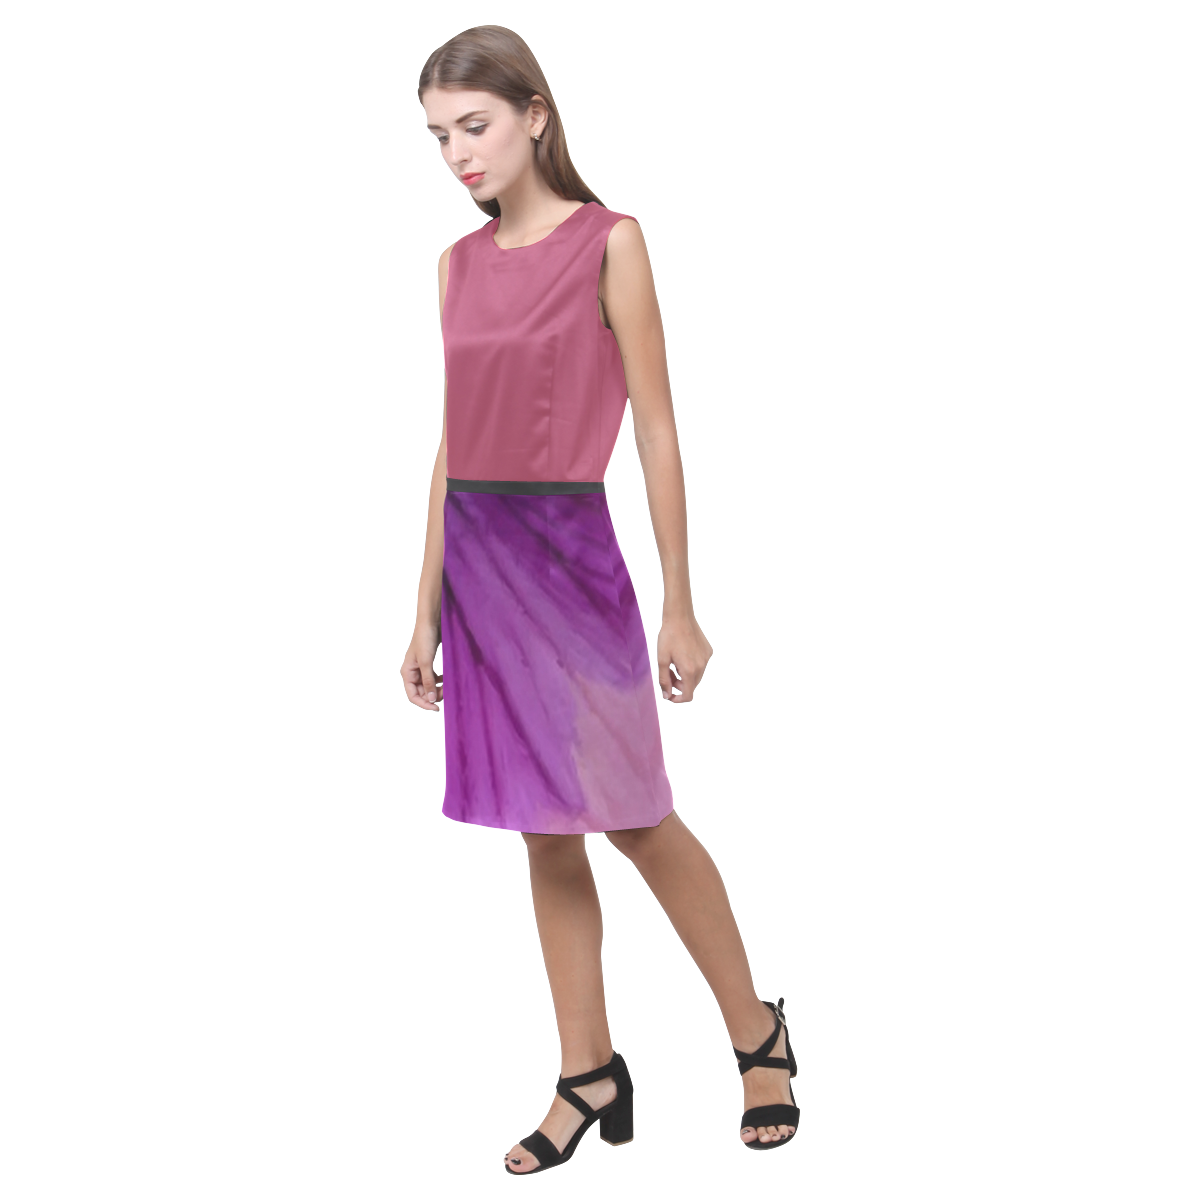 Hippie Pink and Purple Pansy Eos Women's Sleeveless Dress (Model D01)